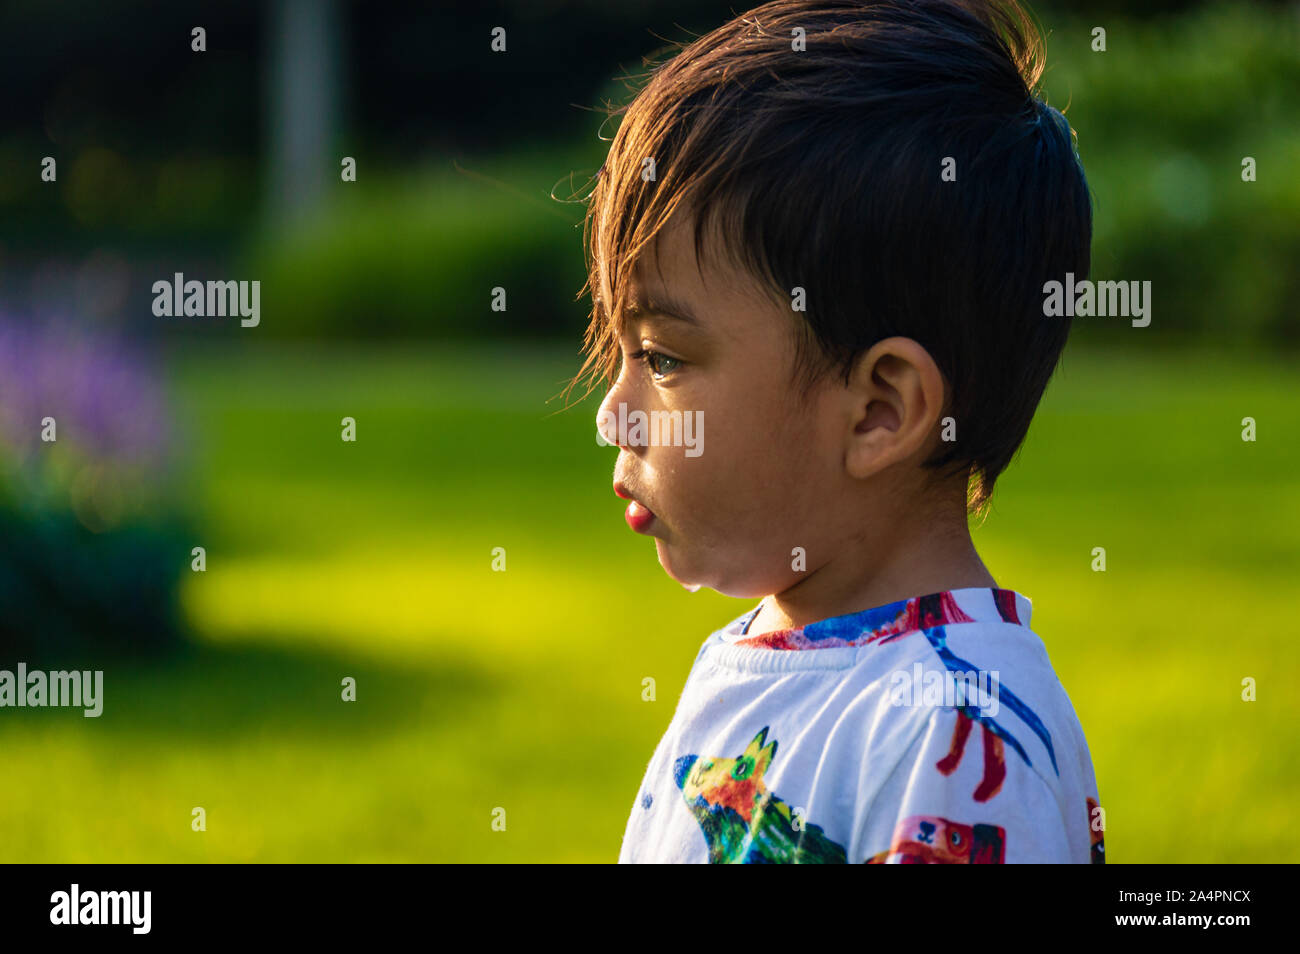 Cute Mexican American boy child is playing in a garden park. Latino youth having fun together. Stock Photo